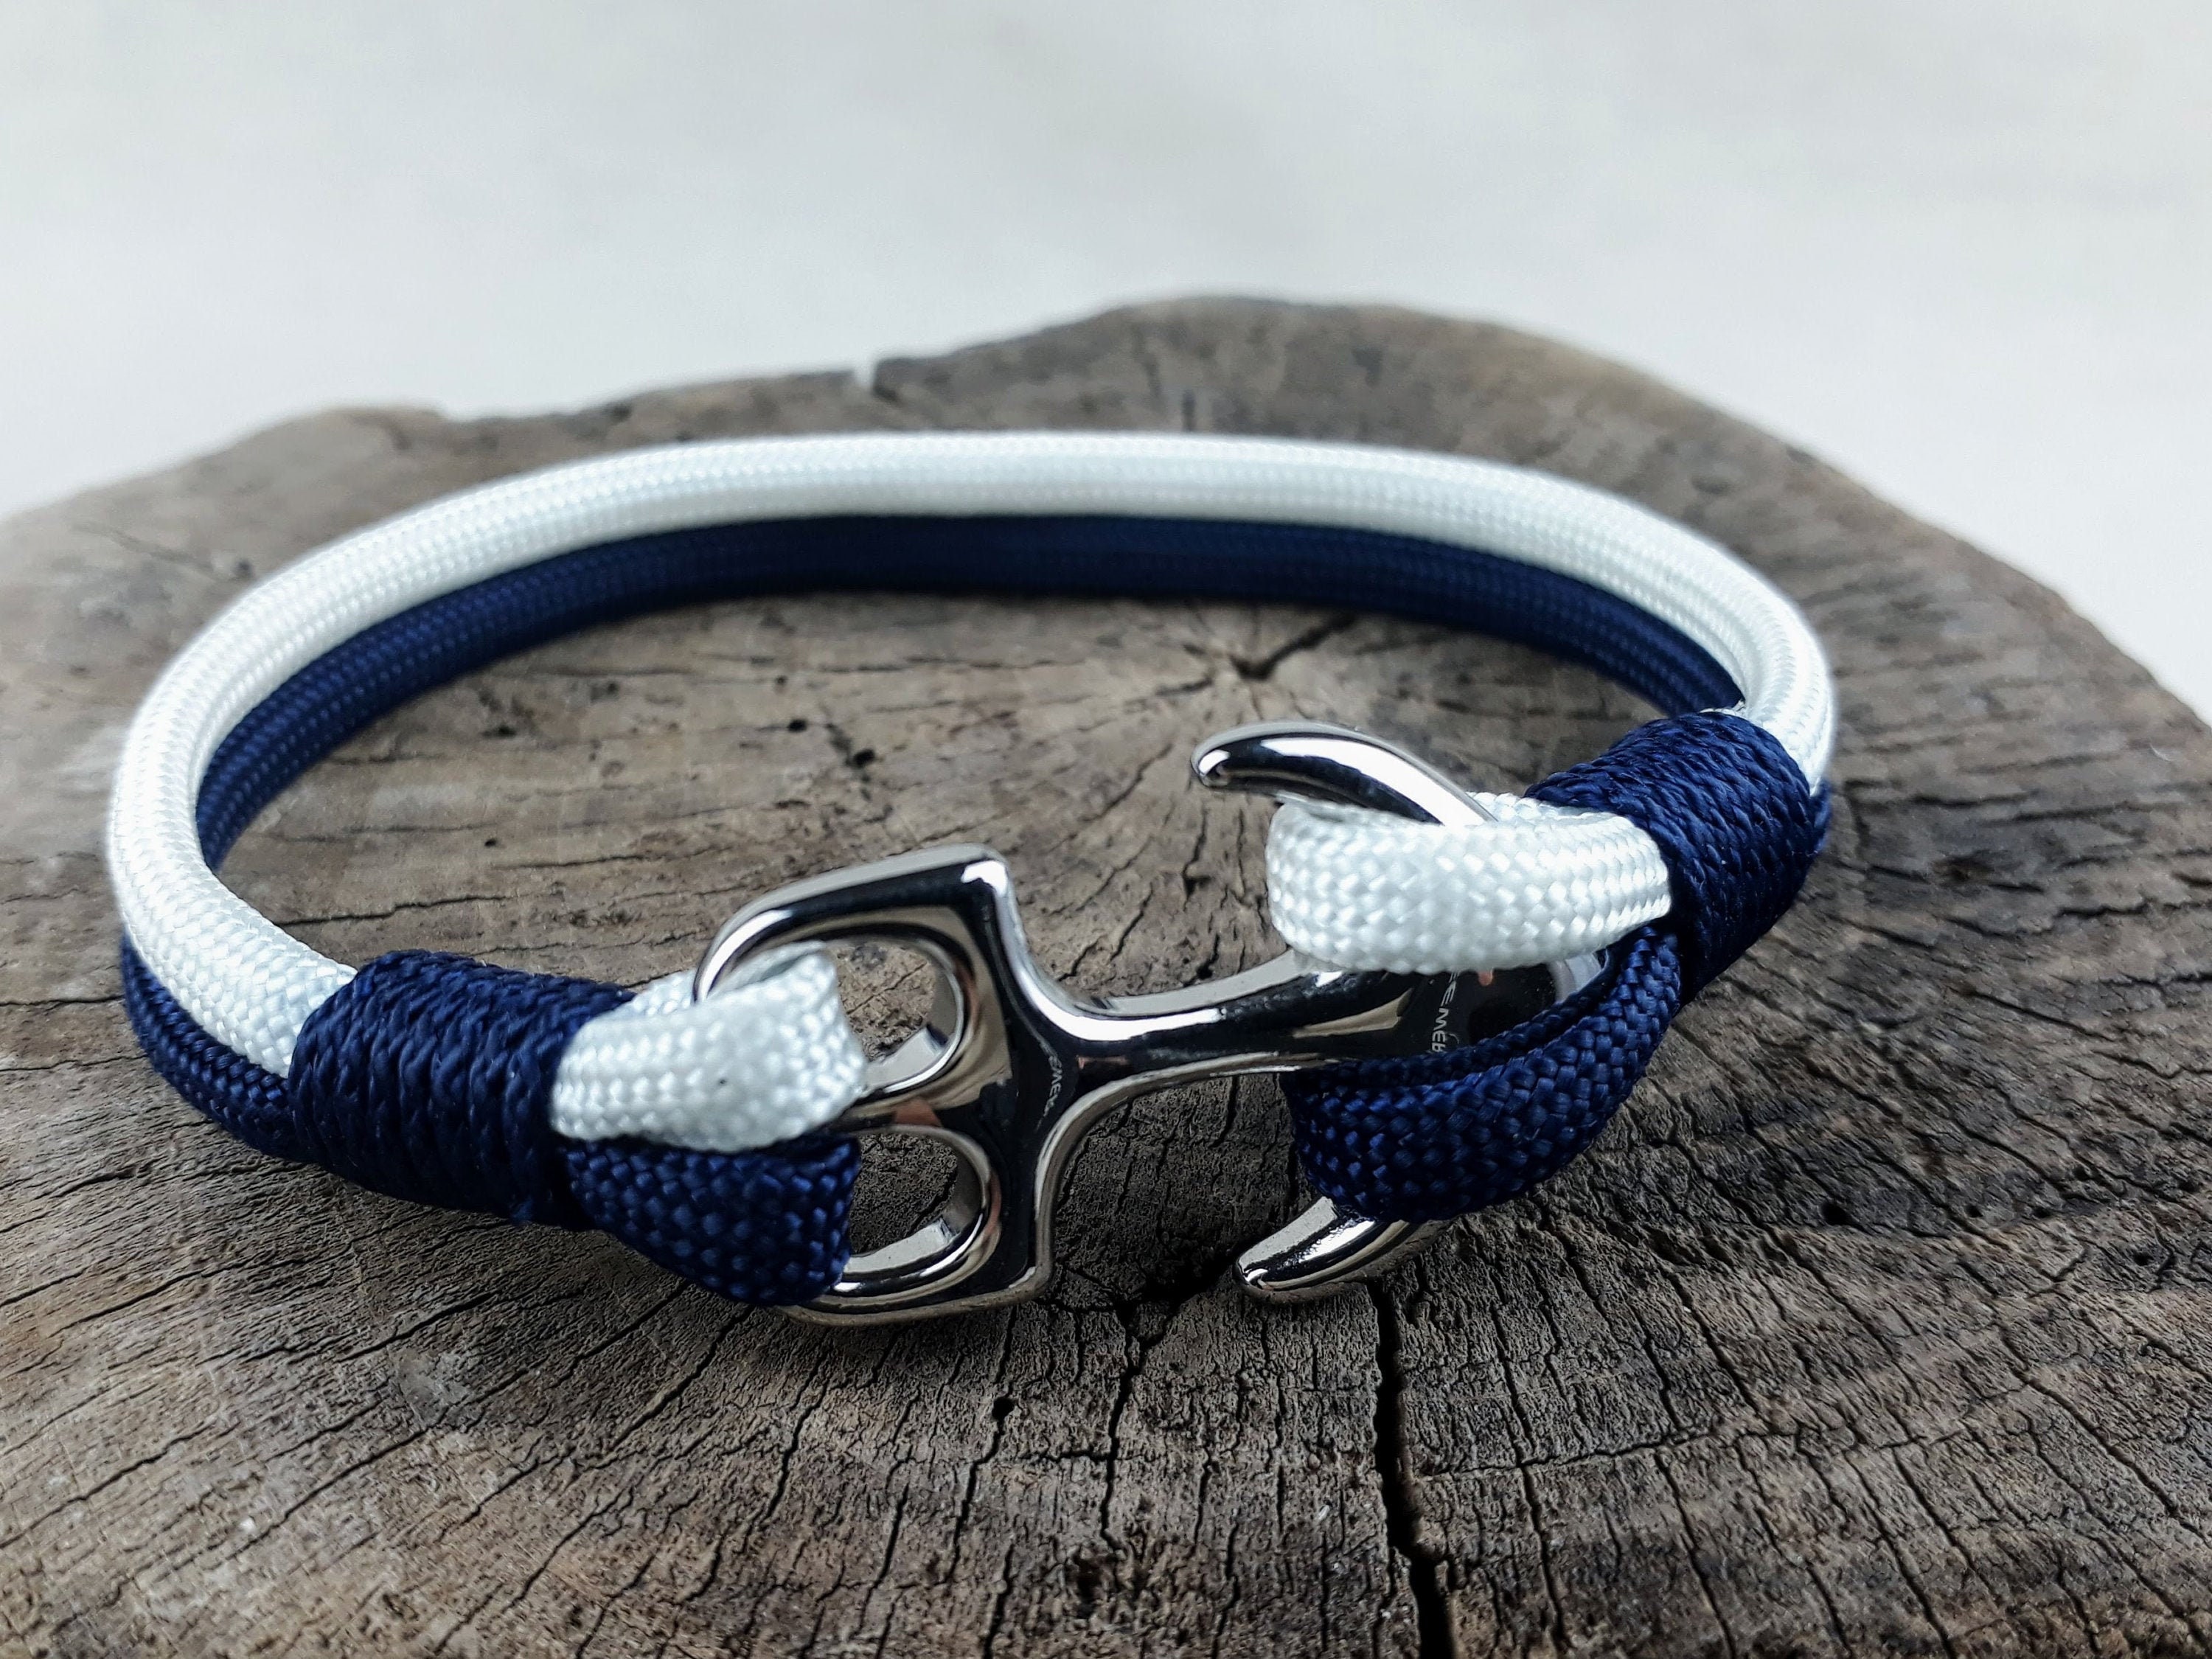 Amazon.com: Navy & Silver Anchor Rope Bracelet for Men & Women Made from  Stainless Steel and Paracord, Adjustable, Handmade in The UK : Handmade  Products